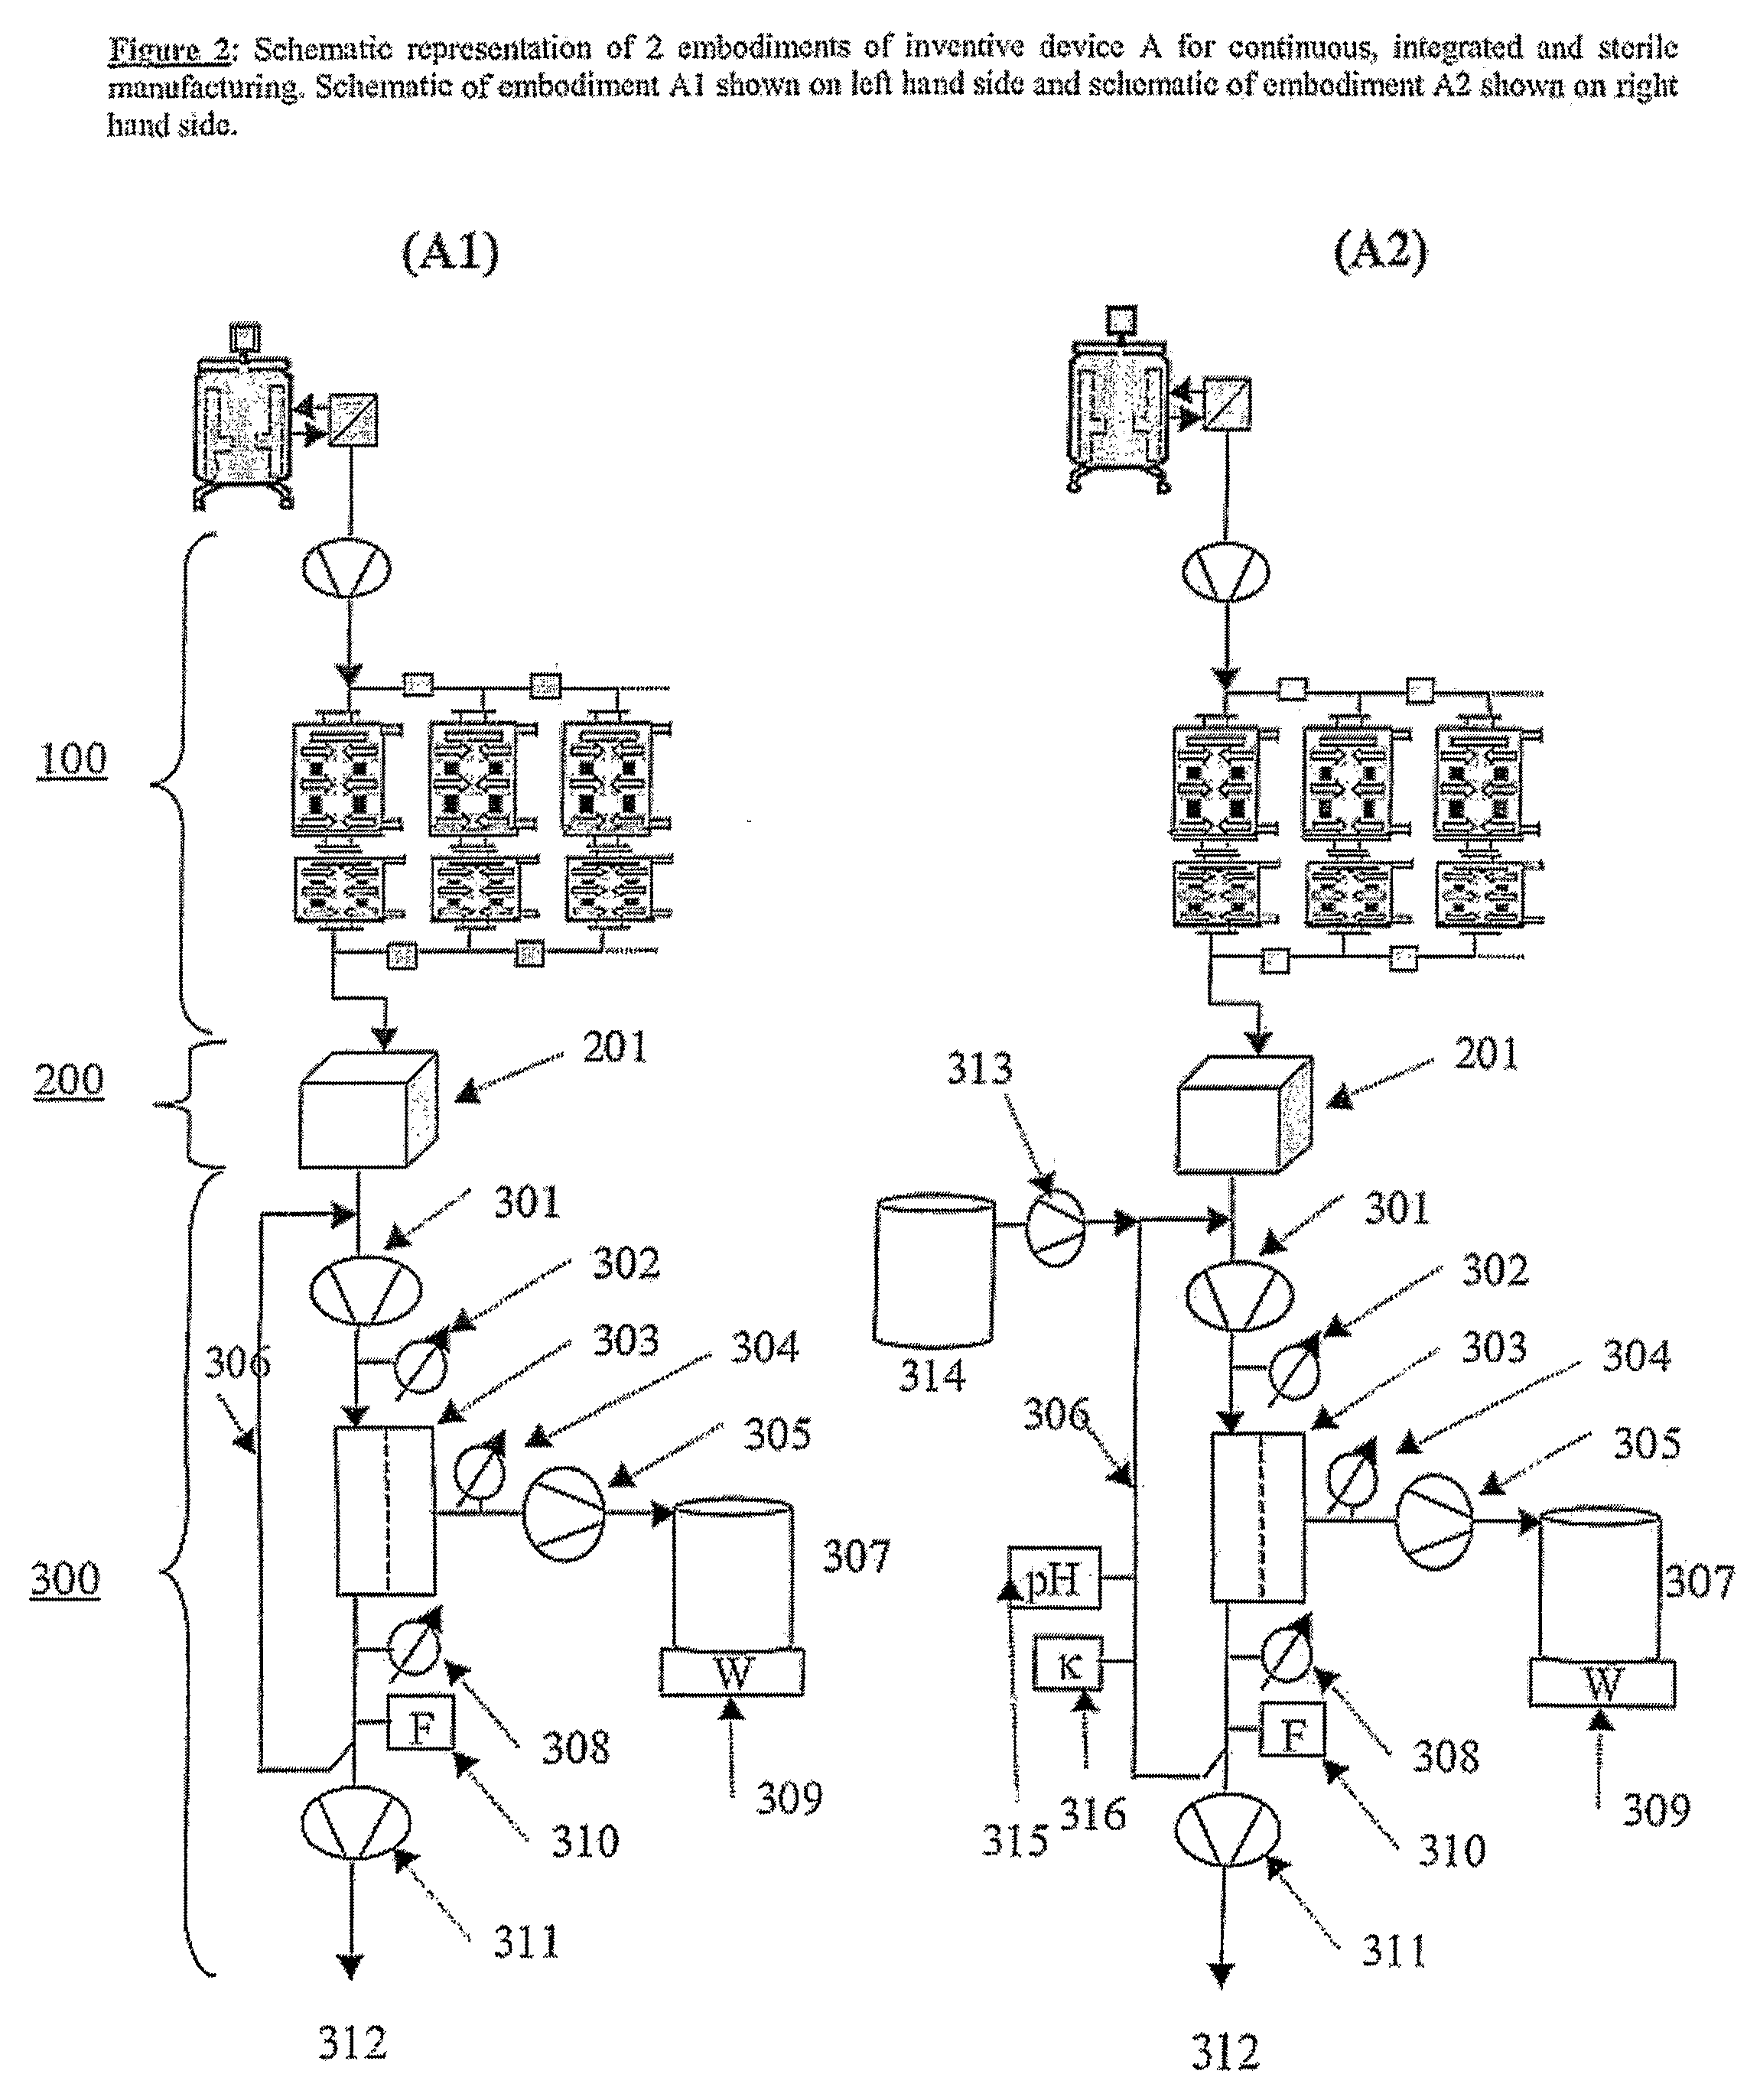 Devices and Methods for Integrated Continuous Manufacturing of Biological Molecules